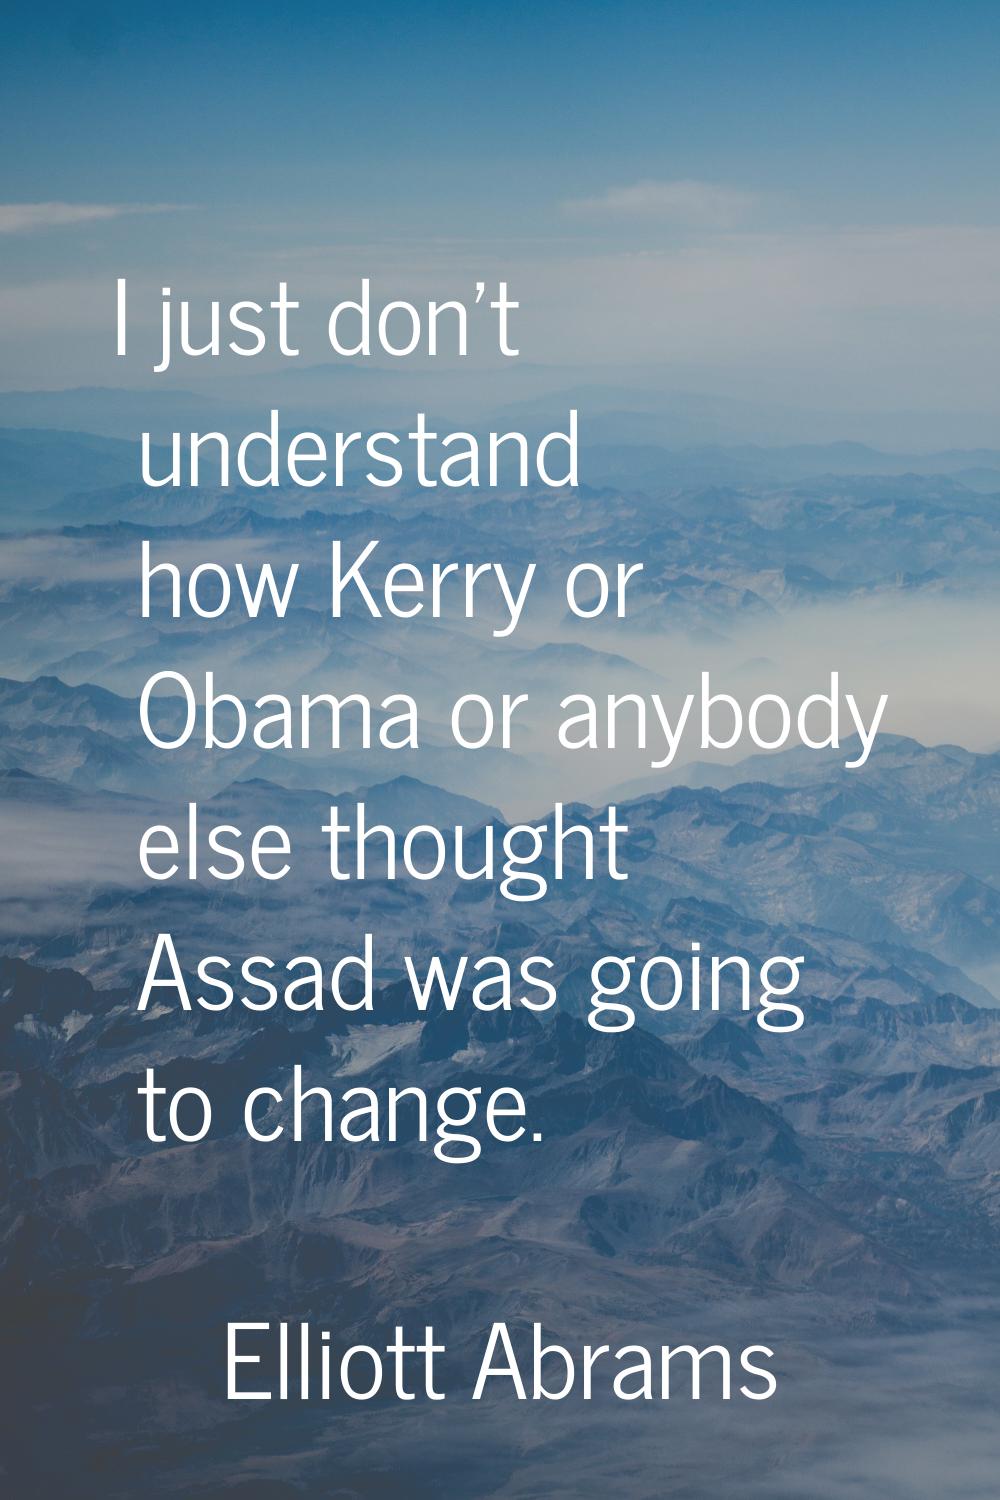 I just don't understand how Kerry or Obama or anybody else thought Assad was going to change.